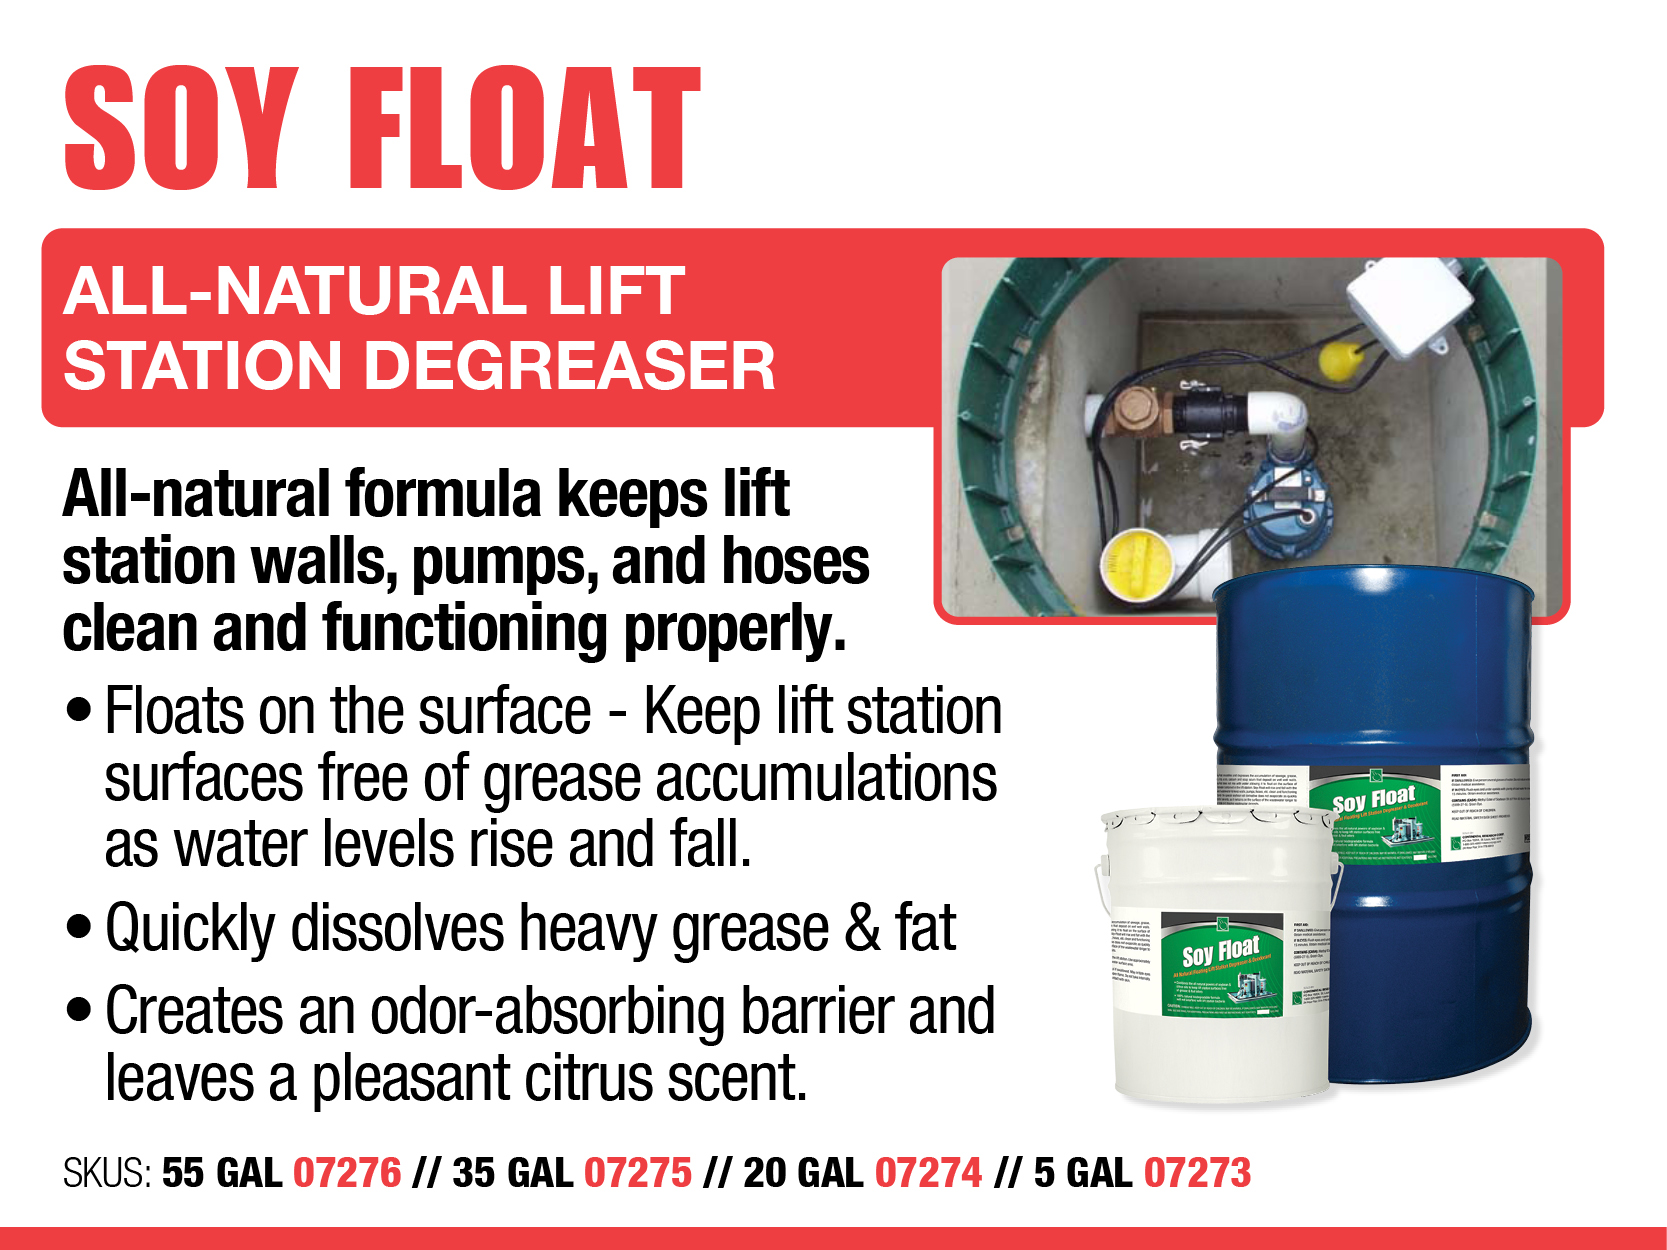 Soy Float - All-Natural Lift Station Degreaser - Wastewater Essentials  - Collections, Plants, and Lagoons - Wastewater Treatment